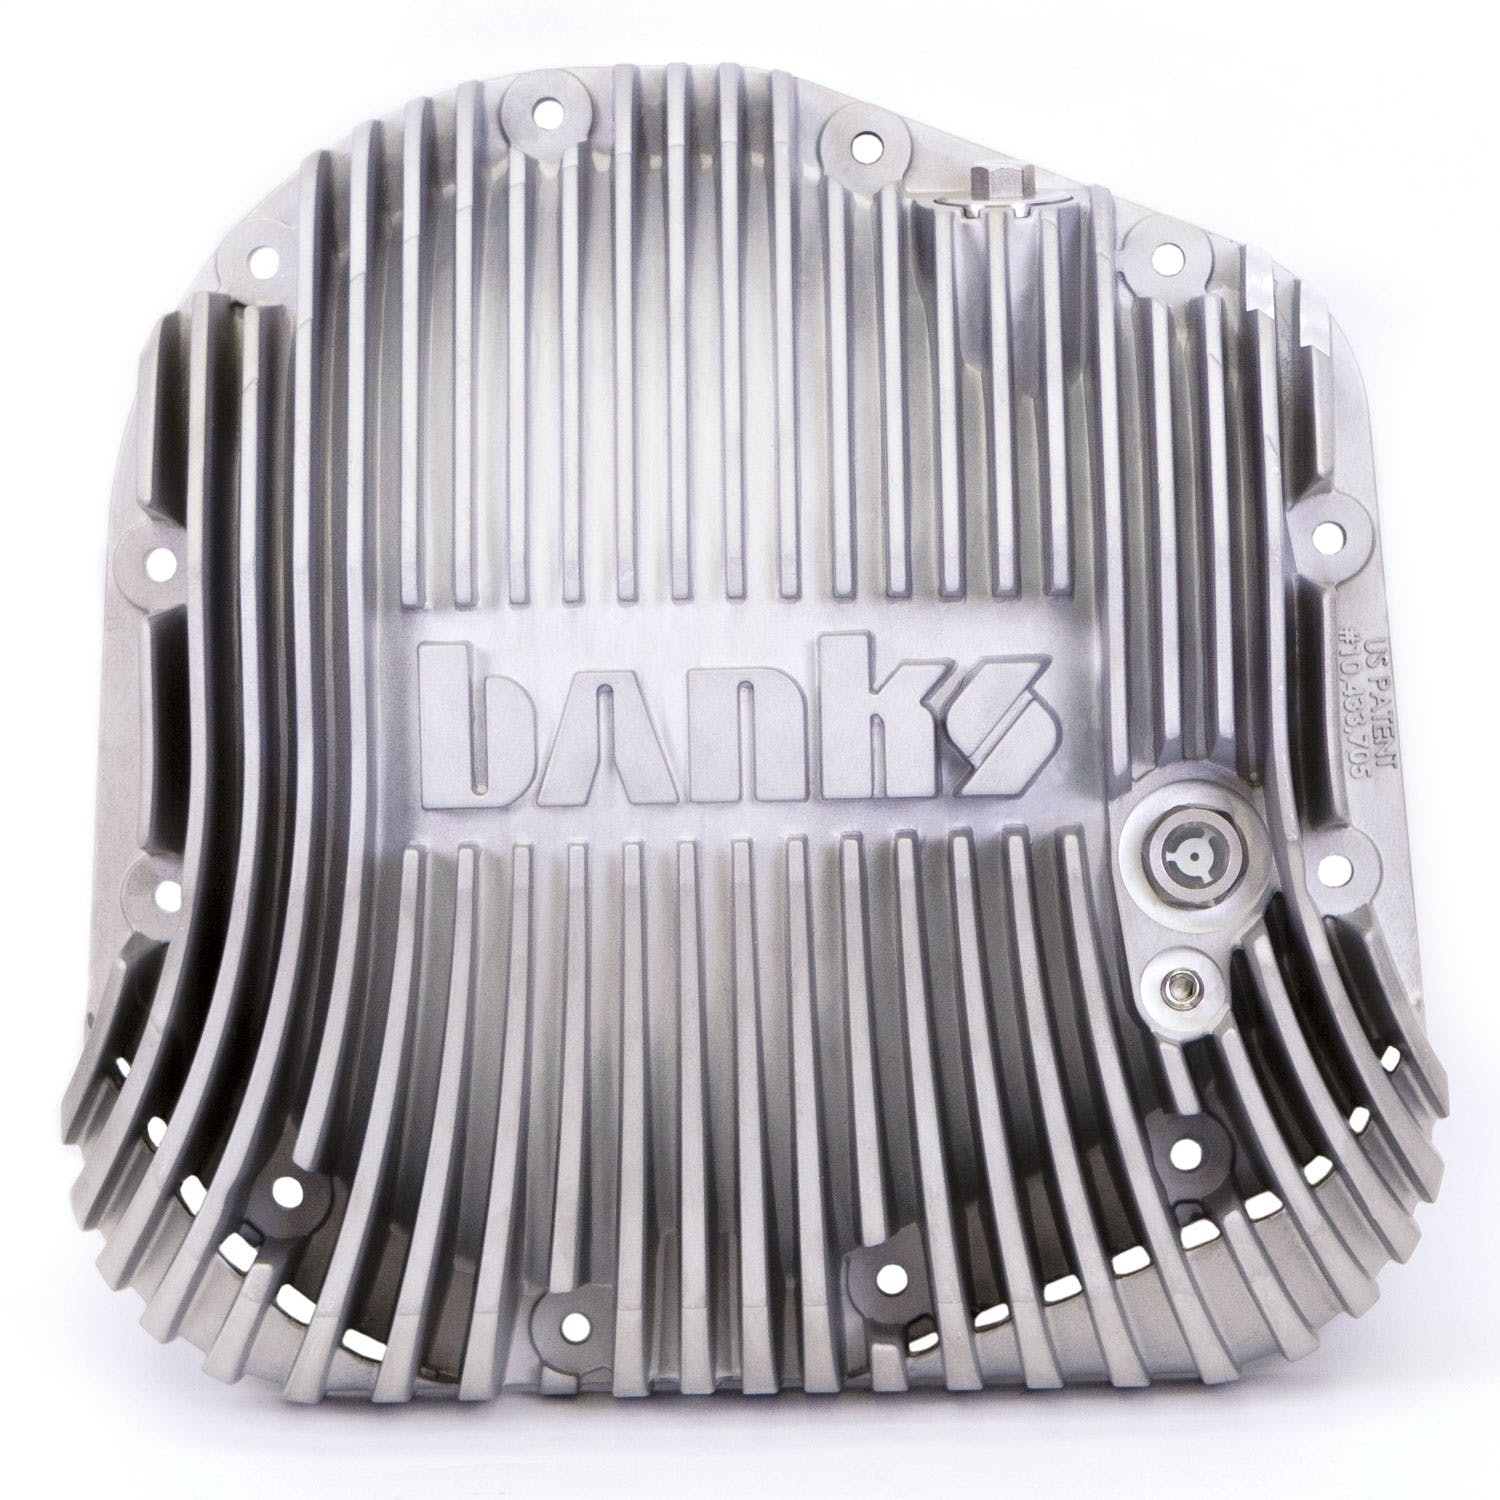 Banks Power 19262 Ram-Air® Differential Cover Kit